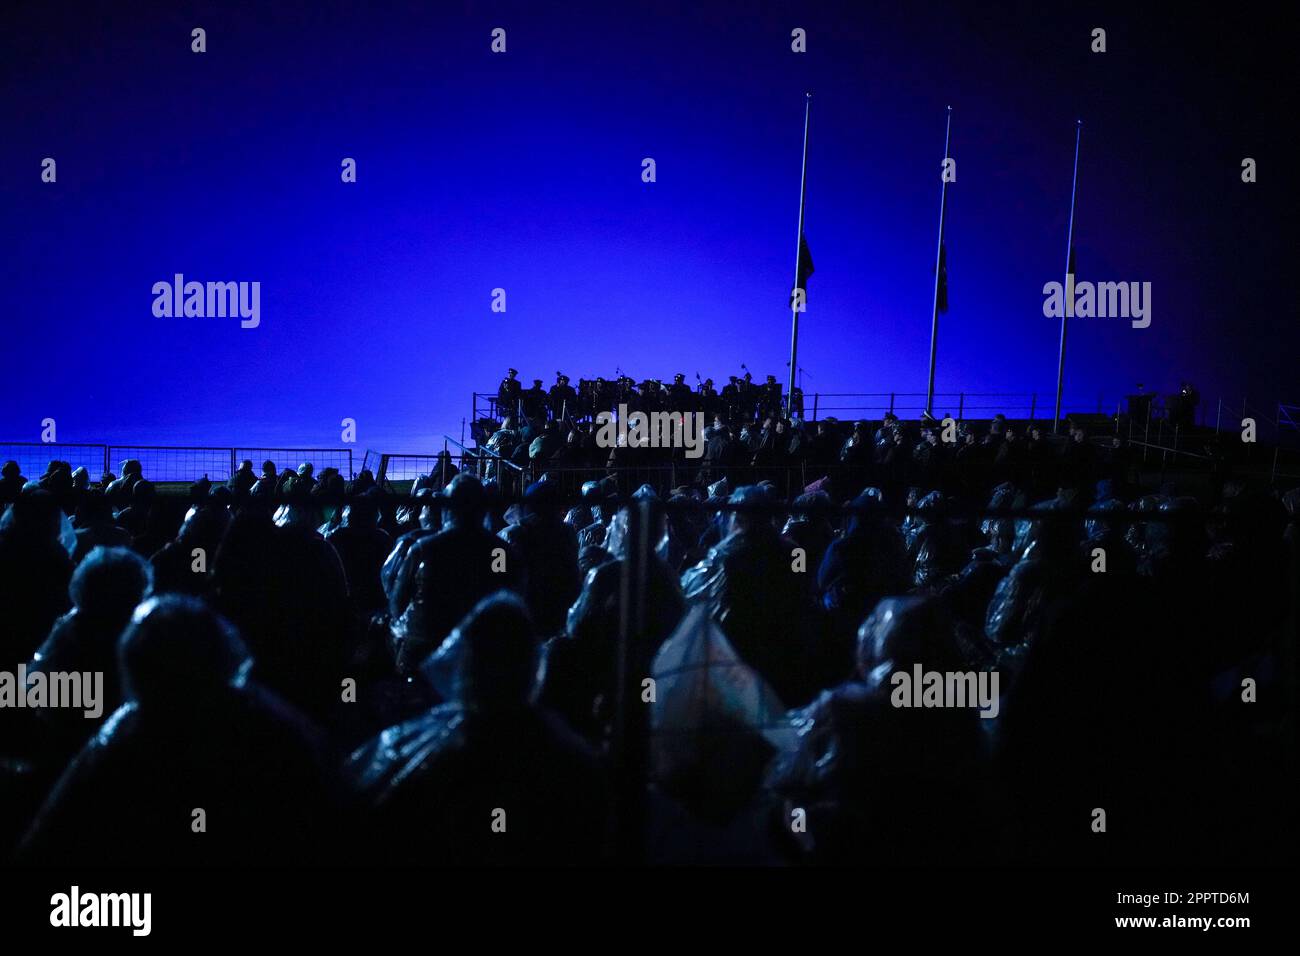 Australian and New Zealand soldiers along with people attend the Dawn Service ceremony at the Anzac Cove beach, the site of the April 25, 1915, World War I landing of the ANZACs (Australian and New Zealand Army Corps) on the Gallipoli peninsula, Turkey, early Tuesday, April 25, 2023. During the 108th Anniversary of Anzac Day, people from Australia and New Zealand joined Turkish and other nations' dignitaries at the former World War I battlefields for a dawn service Tuesday to remember troops that fought during the Gallipoli campaign between British-led forces against the Ottoman Empire army. ( Banque D'Images